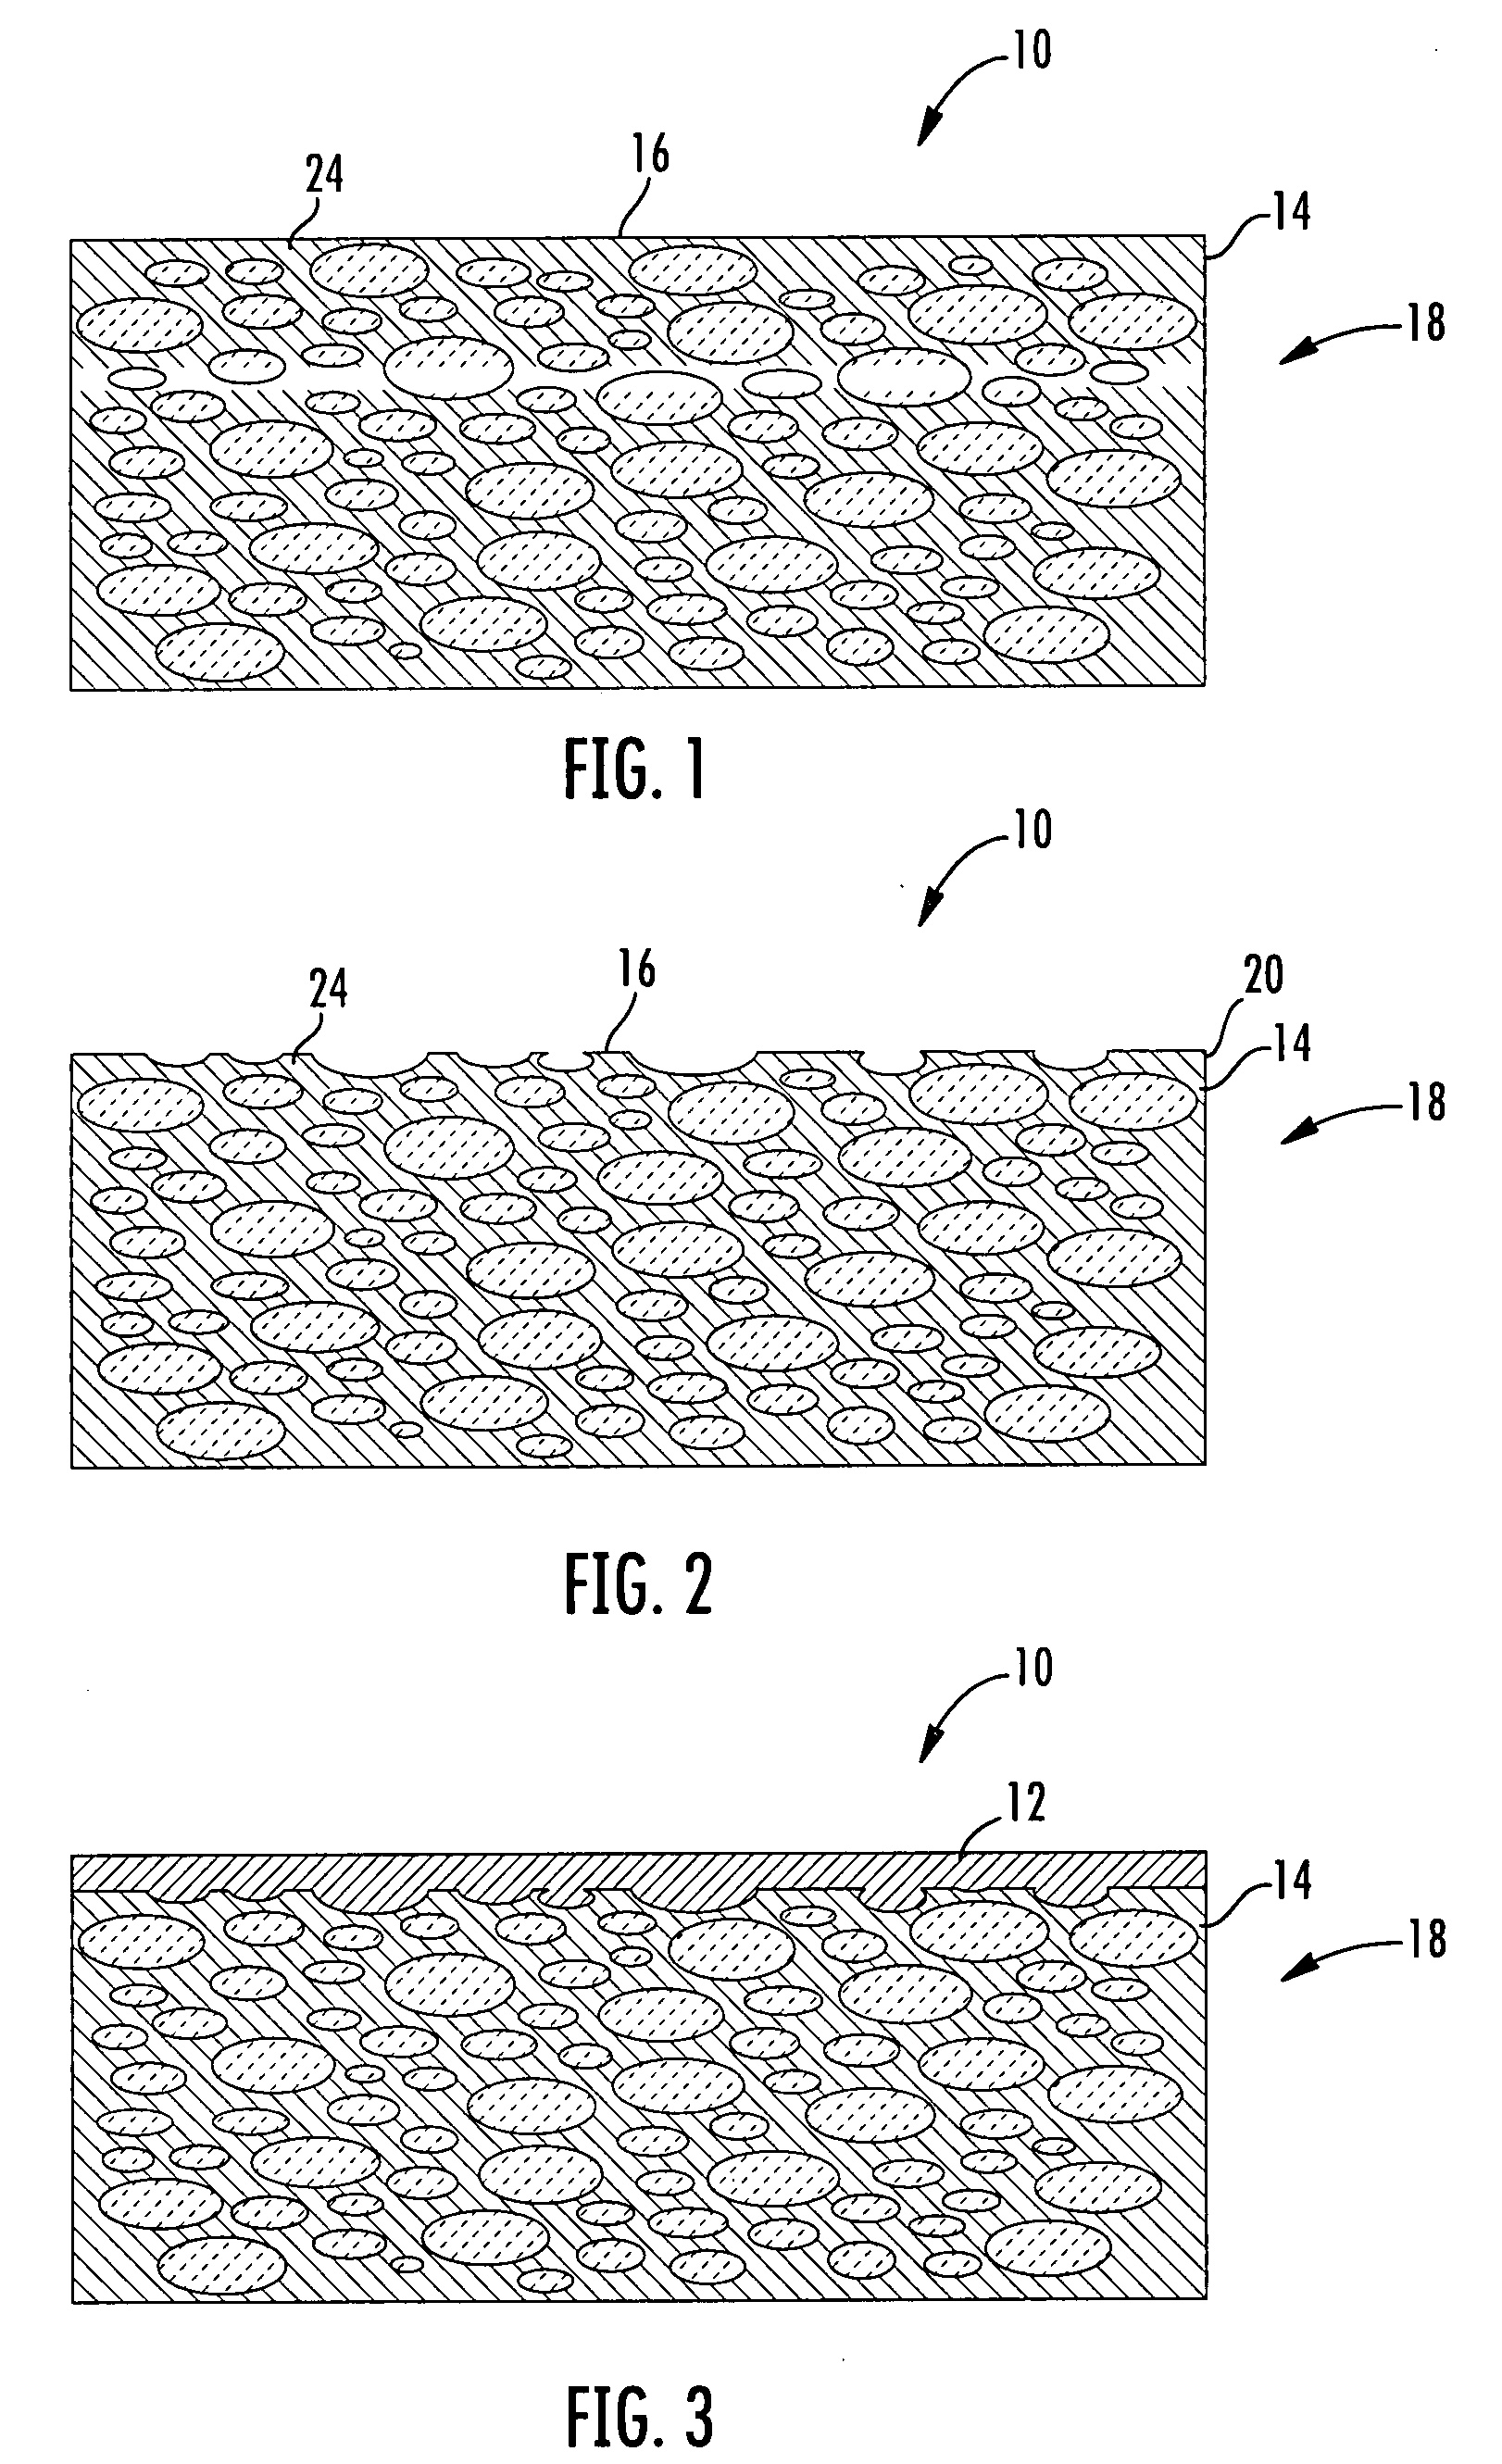 System for applying a continuous surface layer on porous substructures of turbine airfoils